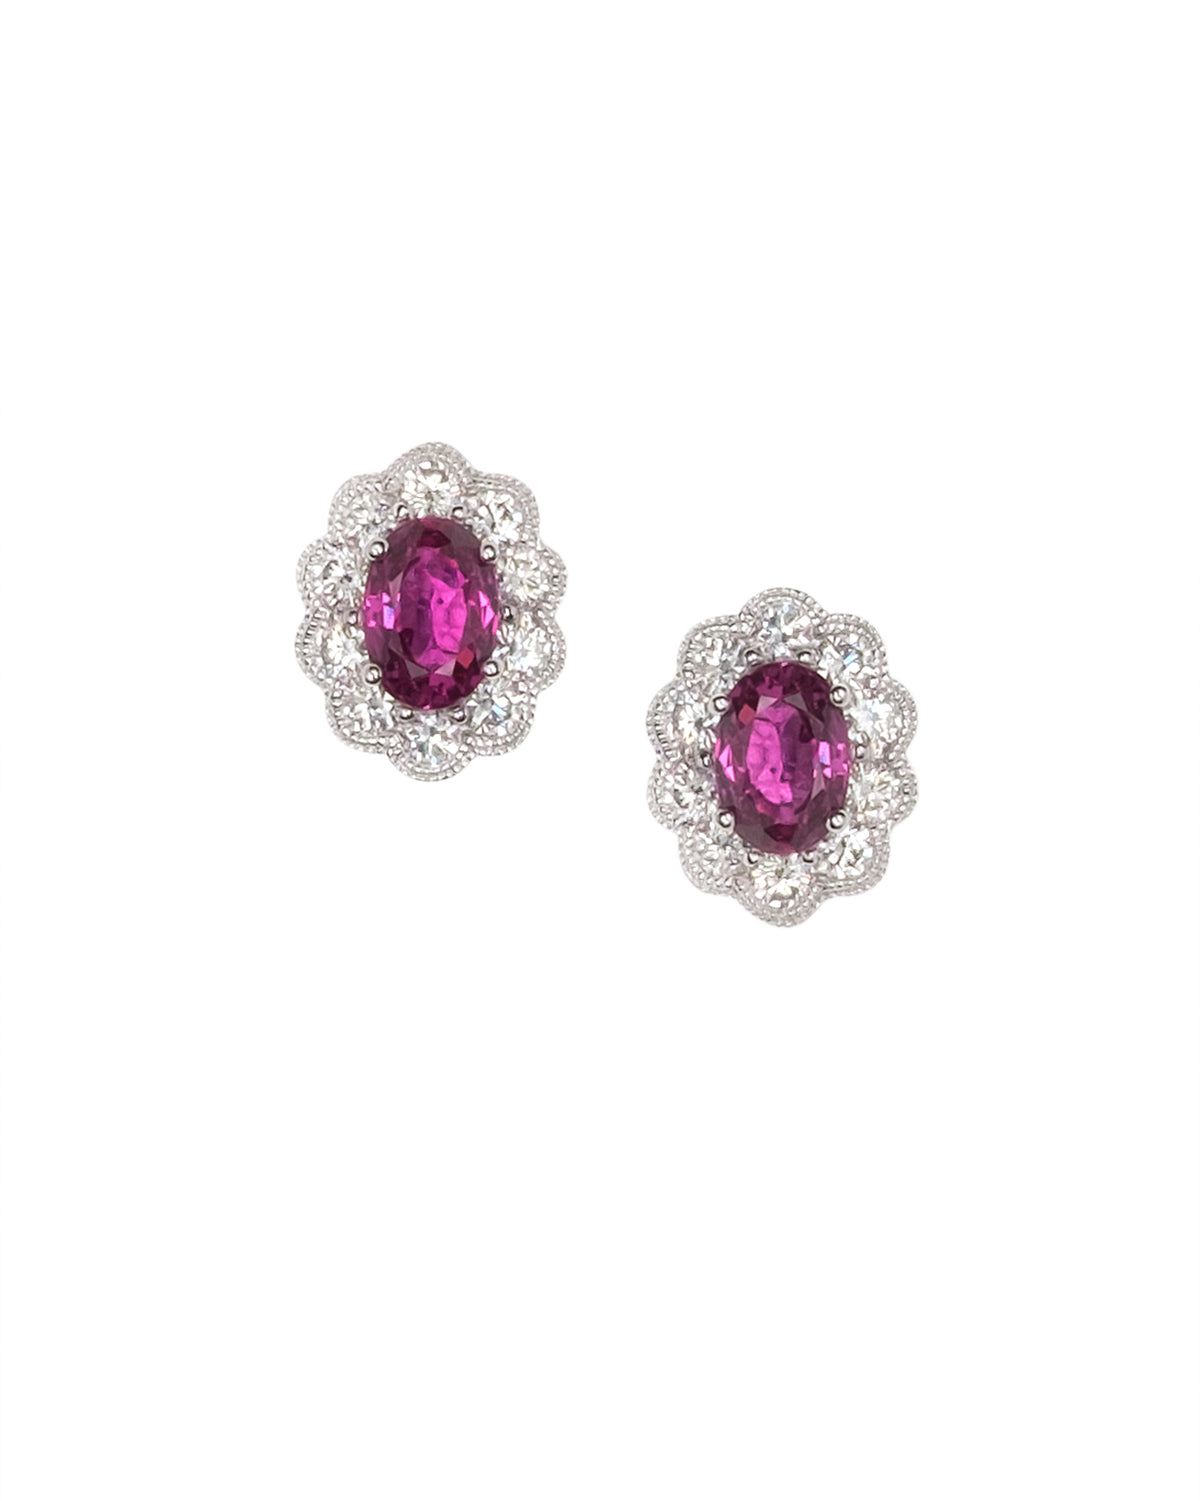 Ruby and Diamond Halo Earrings - Smith and Bevill Jewelers